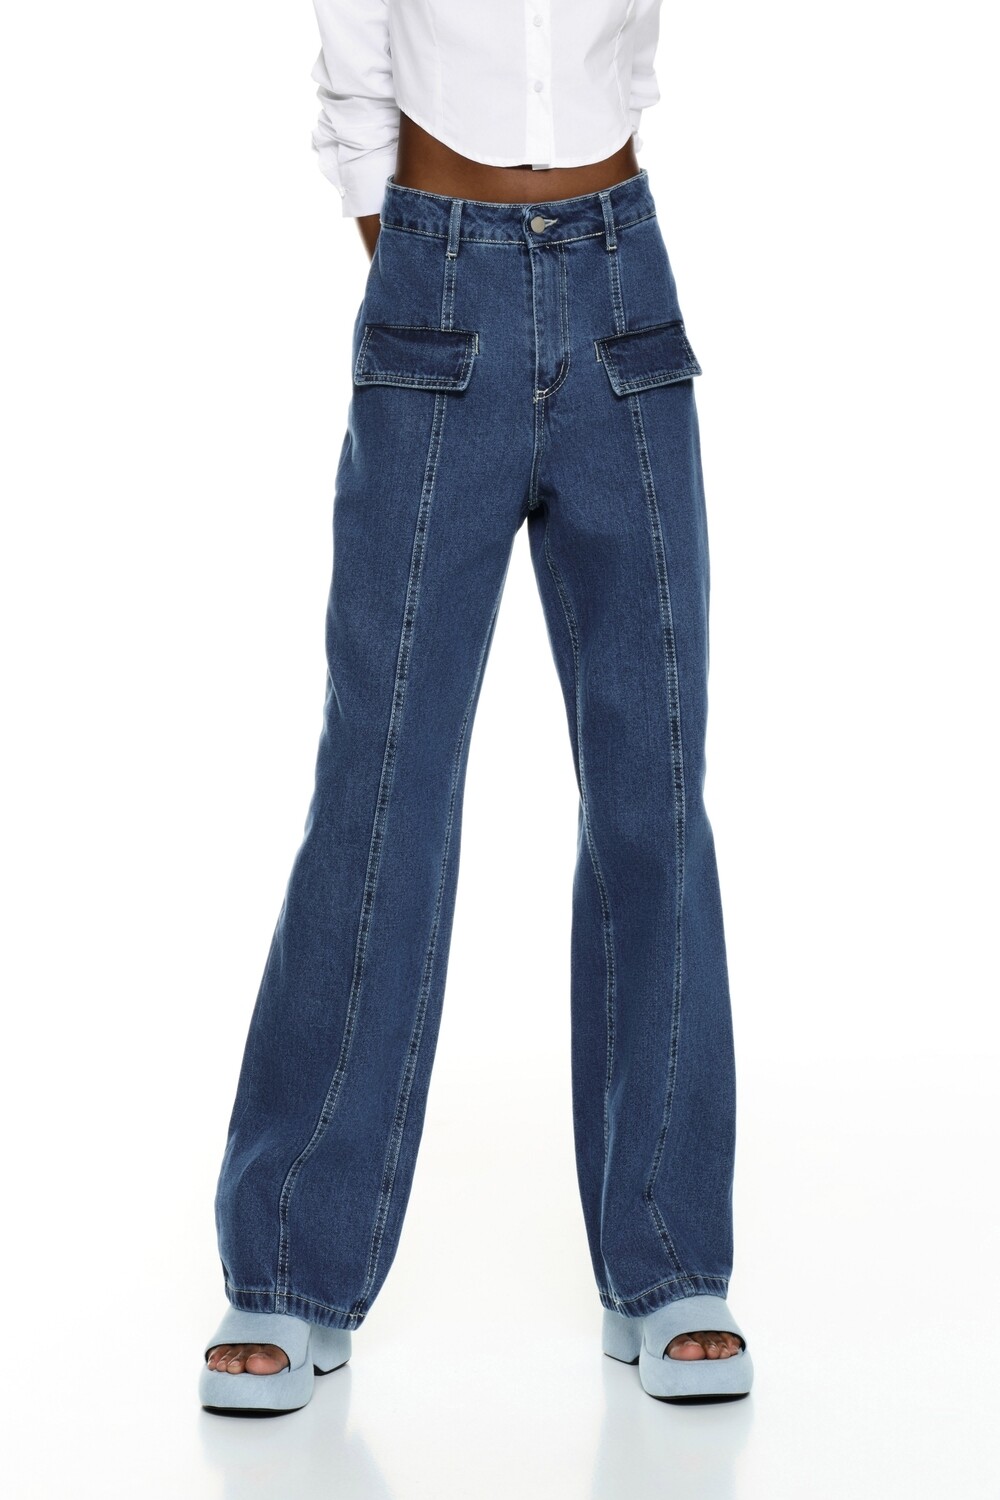 "Maeve" Jeans